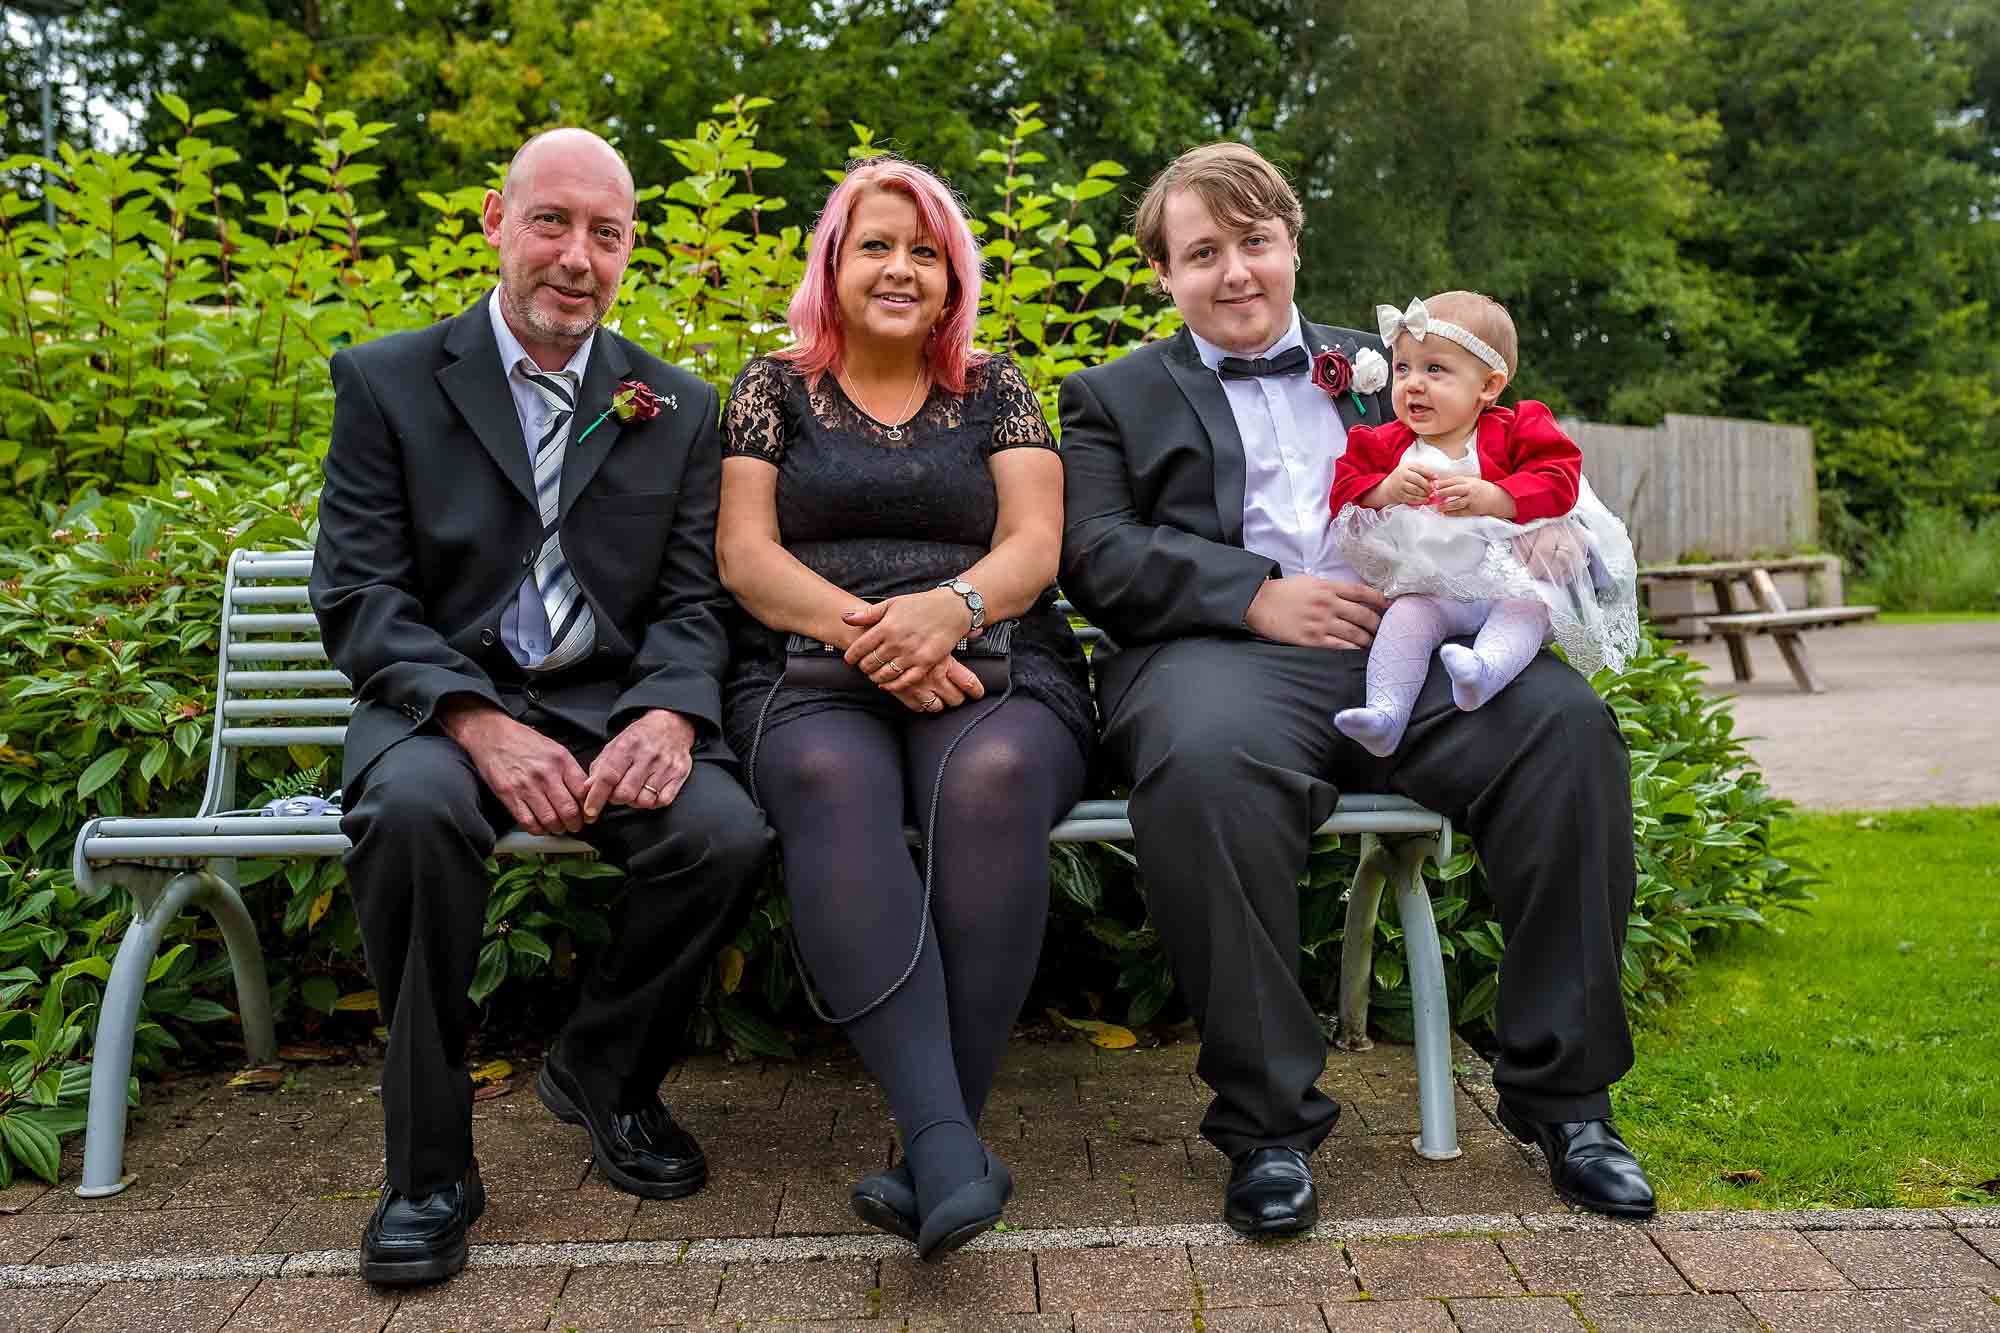 Posed wedding photo of groom with baby daughter and two guests on bench